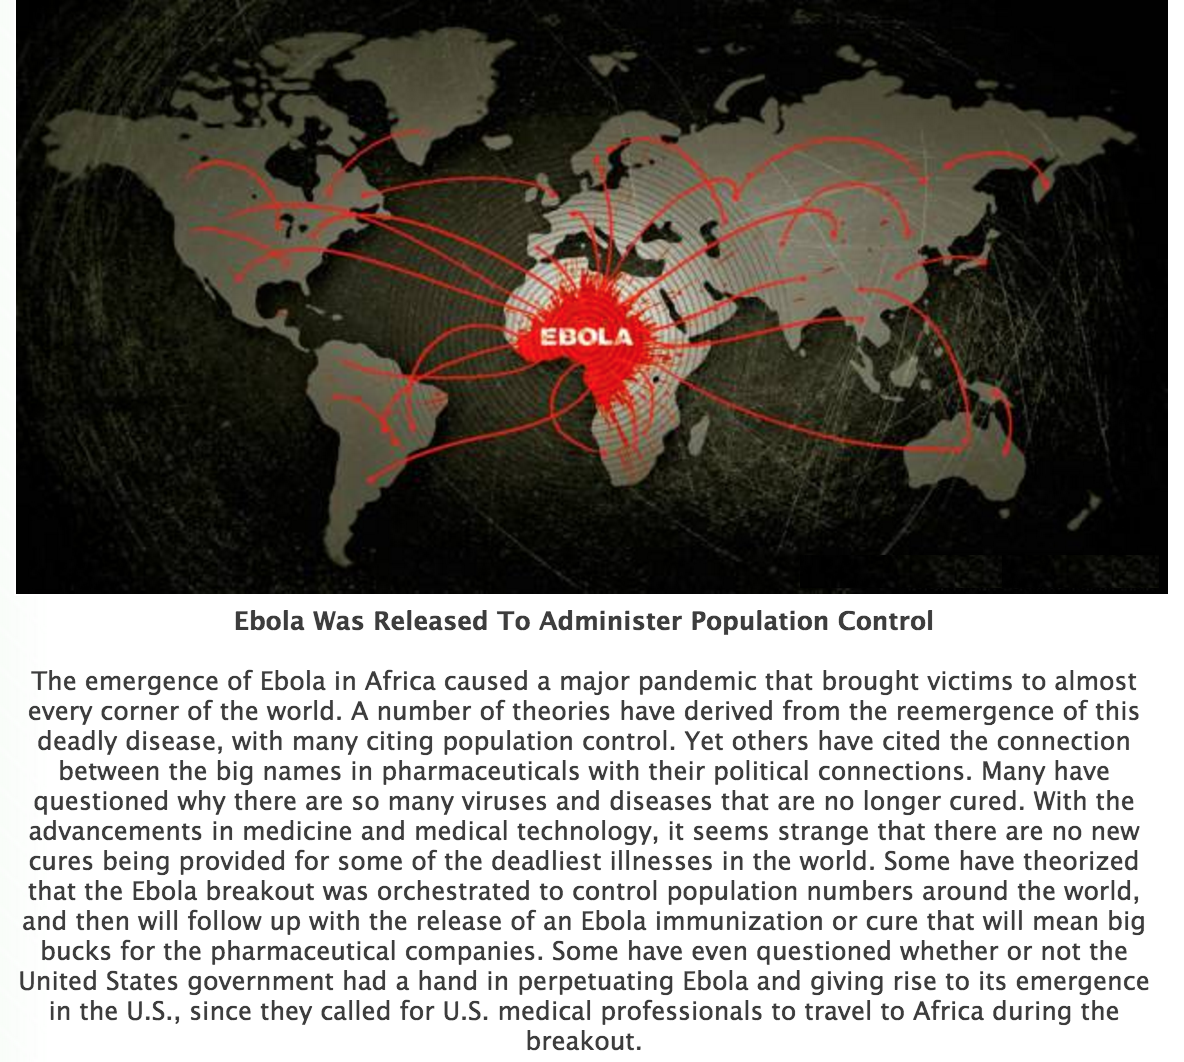 world map - Ebola Ebola Was Released To Administer Population Control The emergence of Ebola in Africa caused a major pandemic that brought victims to almost every corner of the world. A number of theories have derived from the reemergence of this deadly 